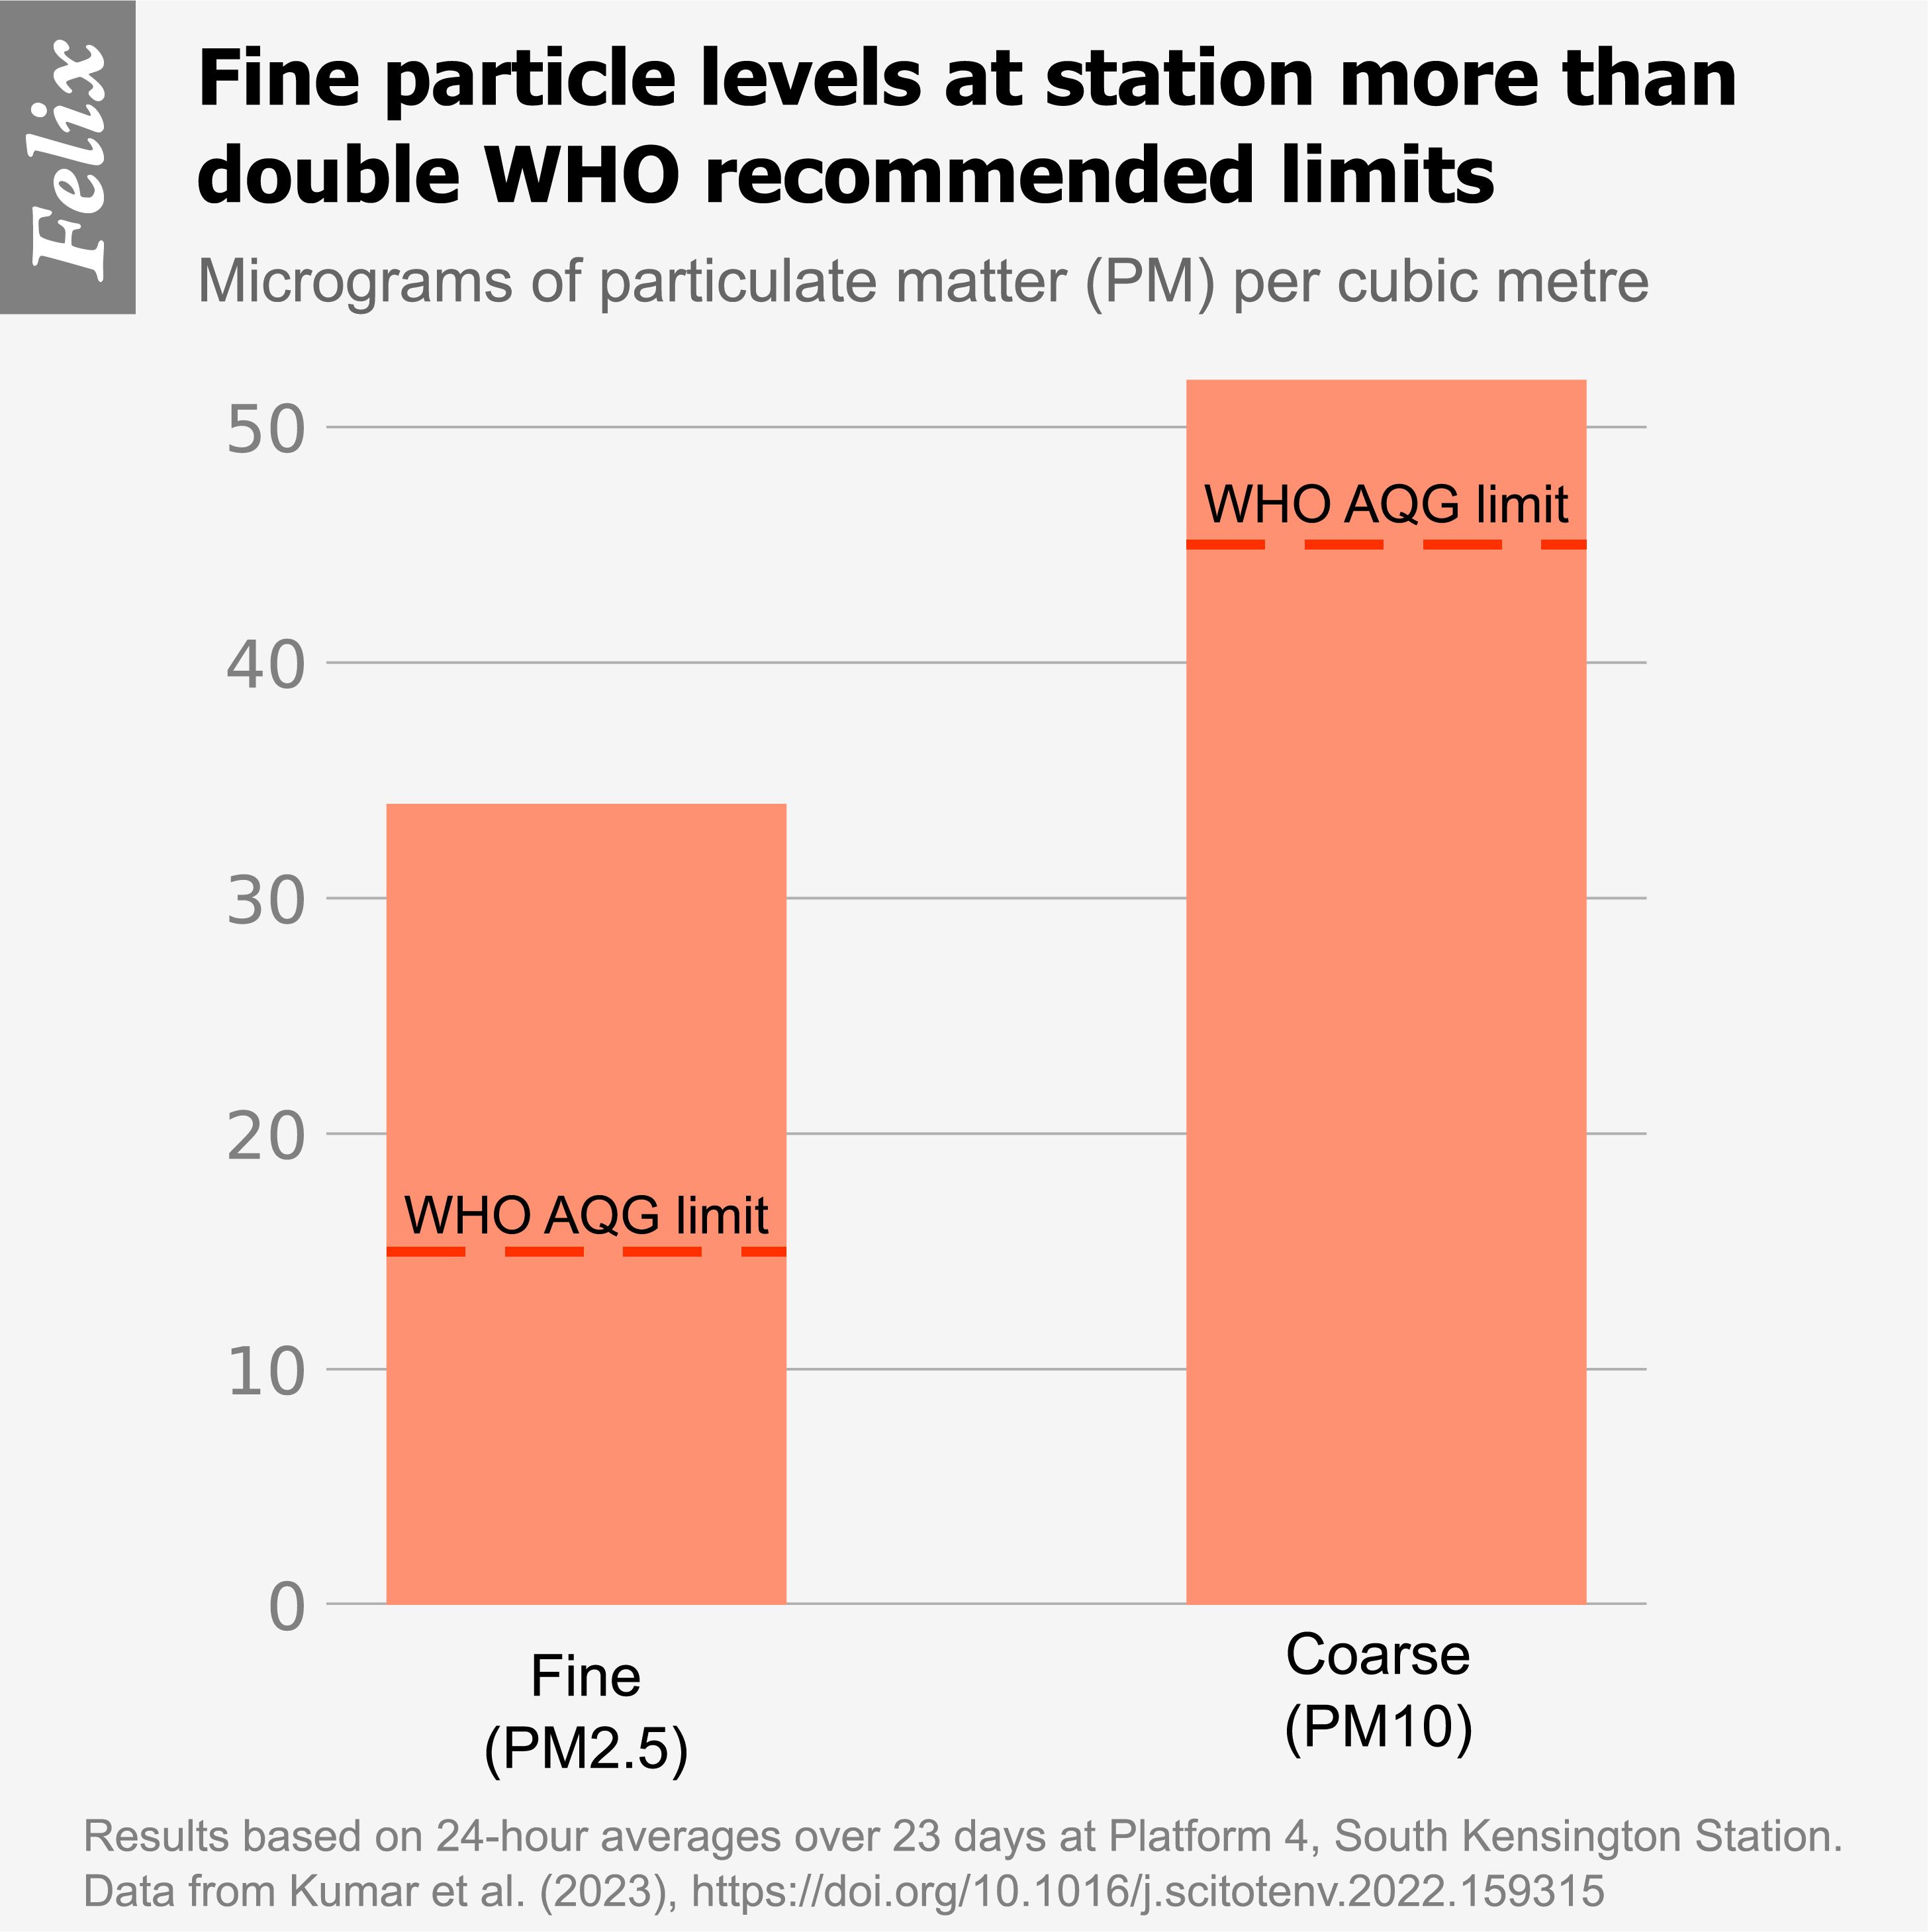 Air pollution levels at South Kensington Station